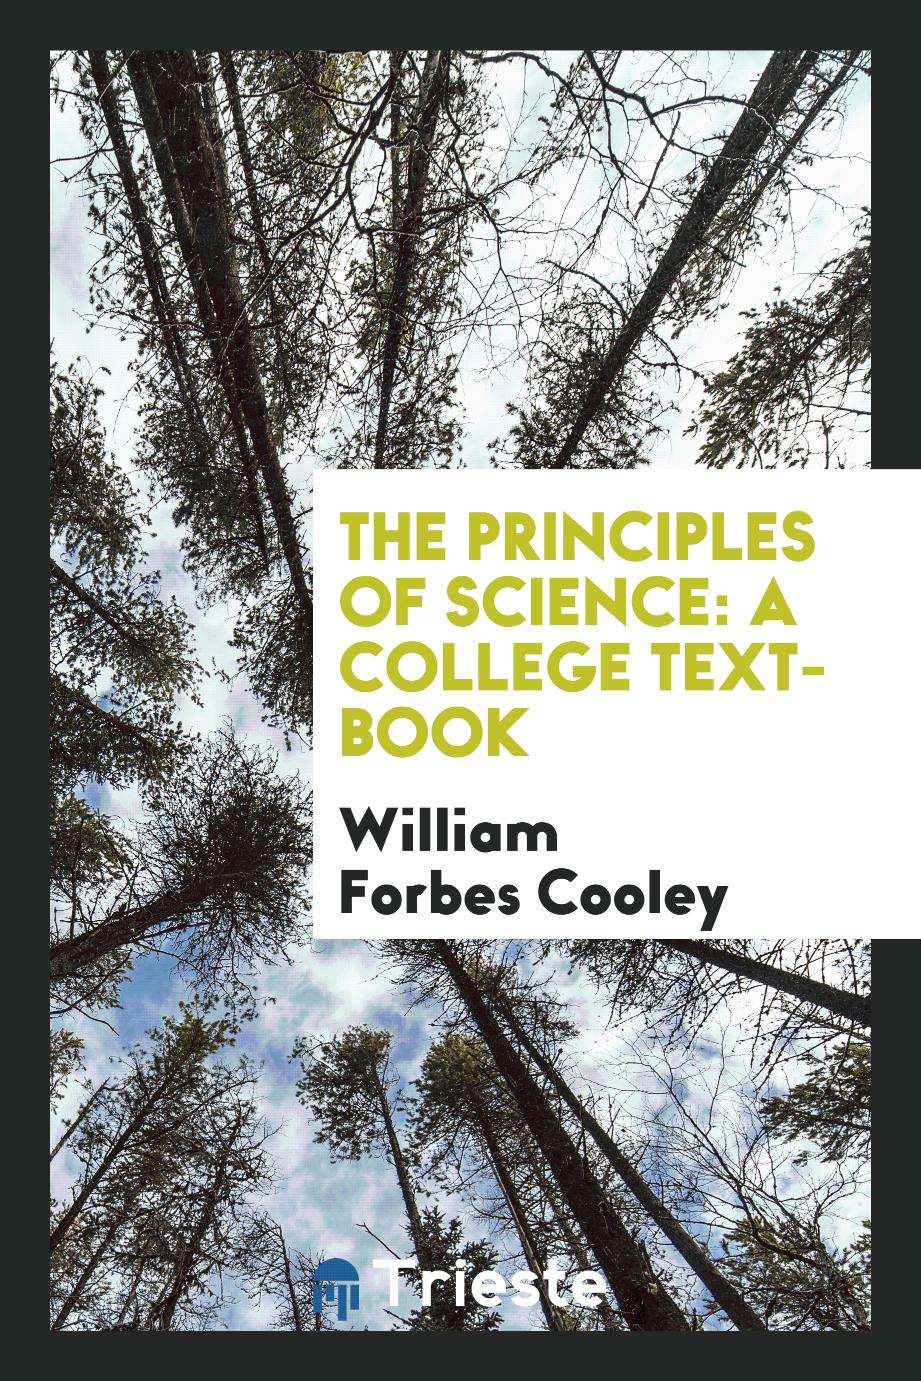 The principles of science: a college text-book